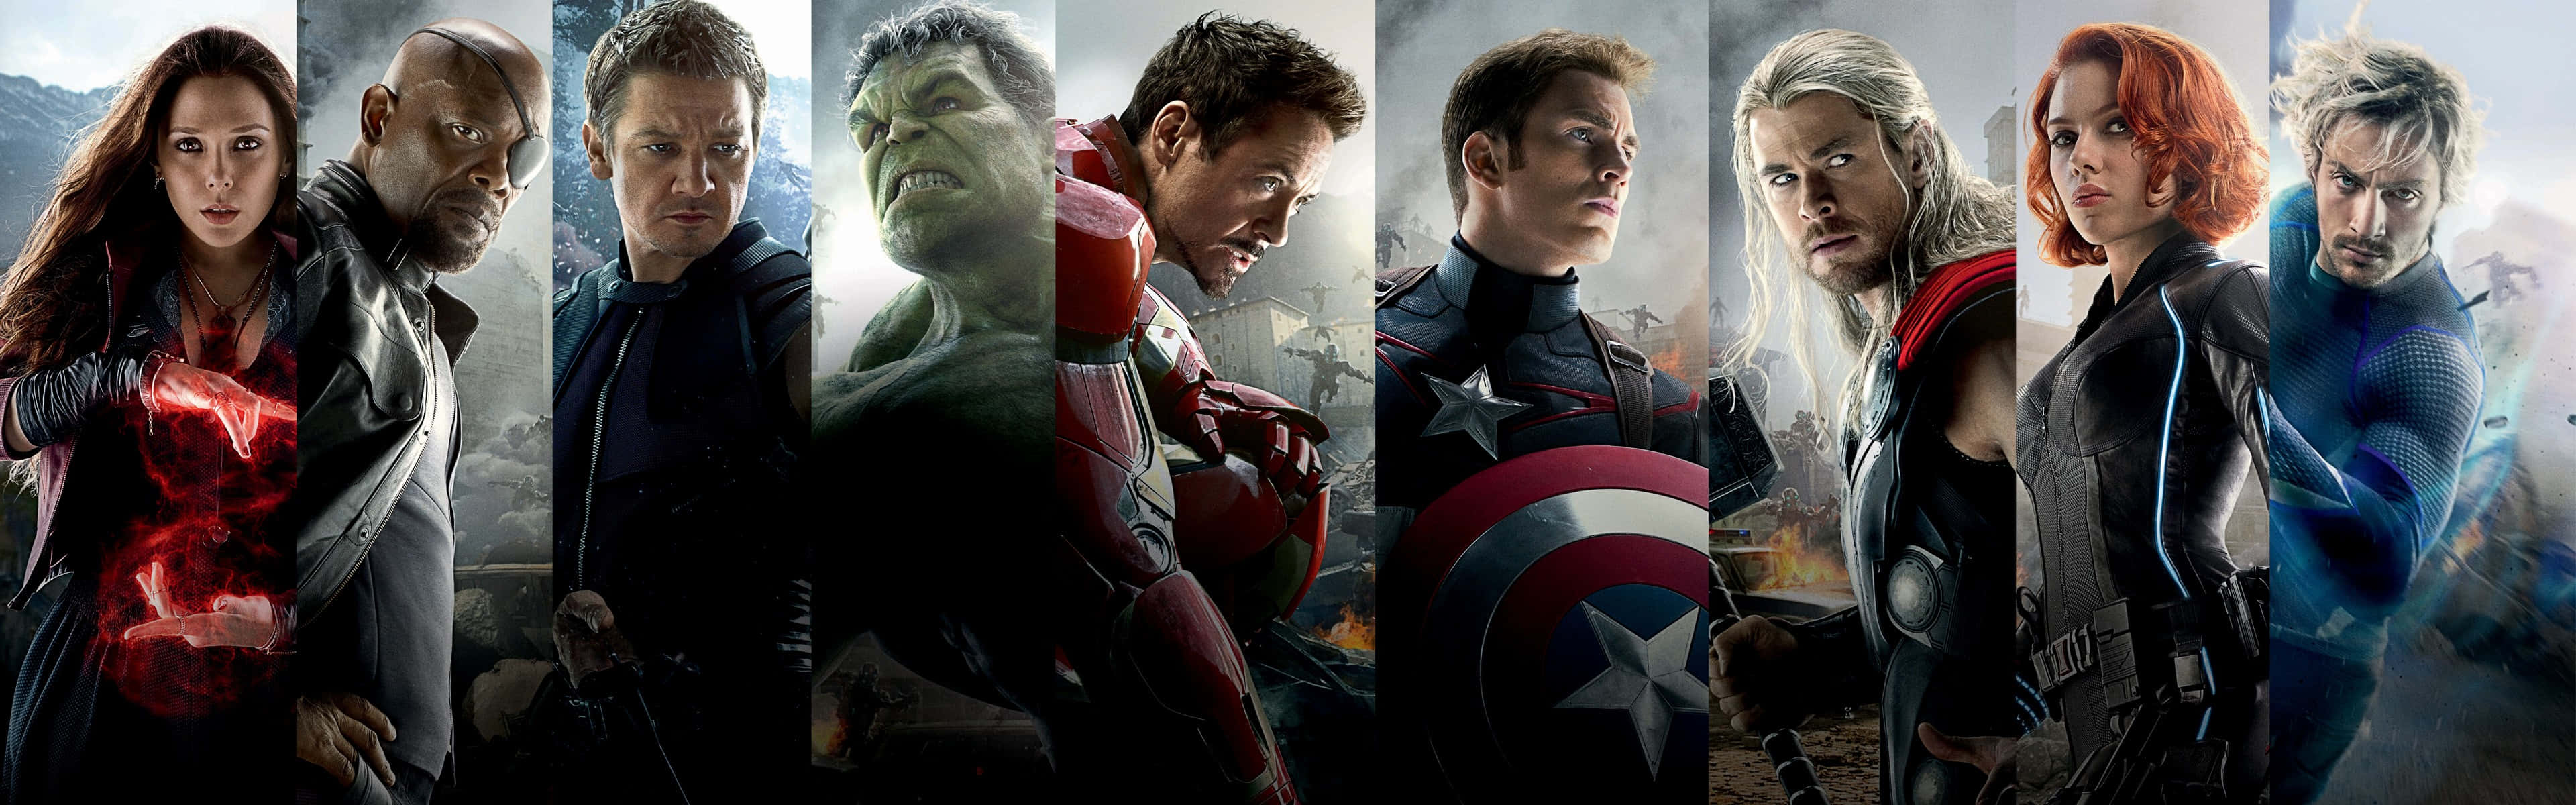 Get the Avengers Dual Screen for an Ultra HD gaming experience Wallpaper